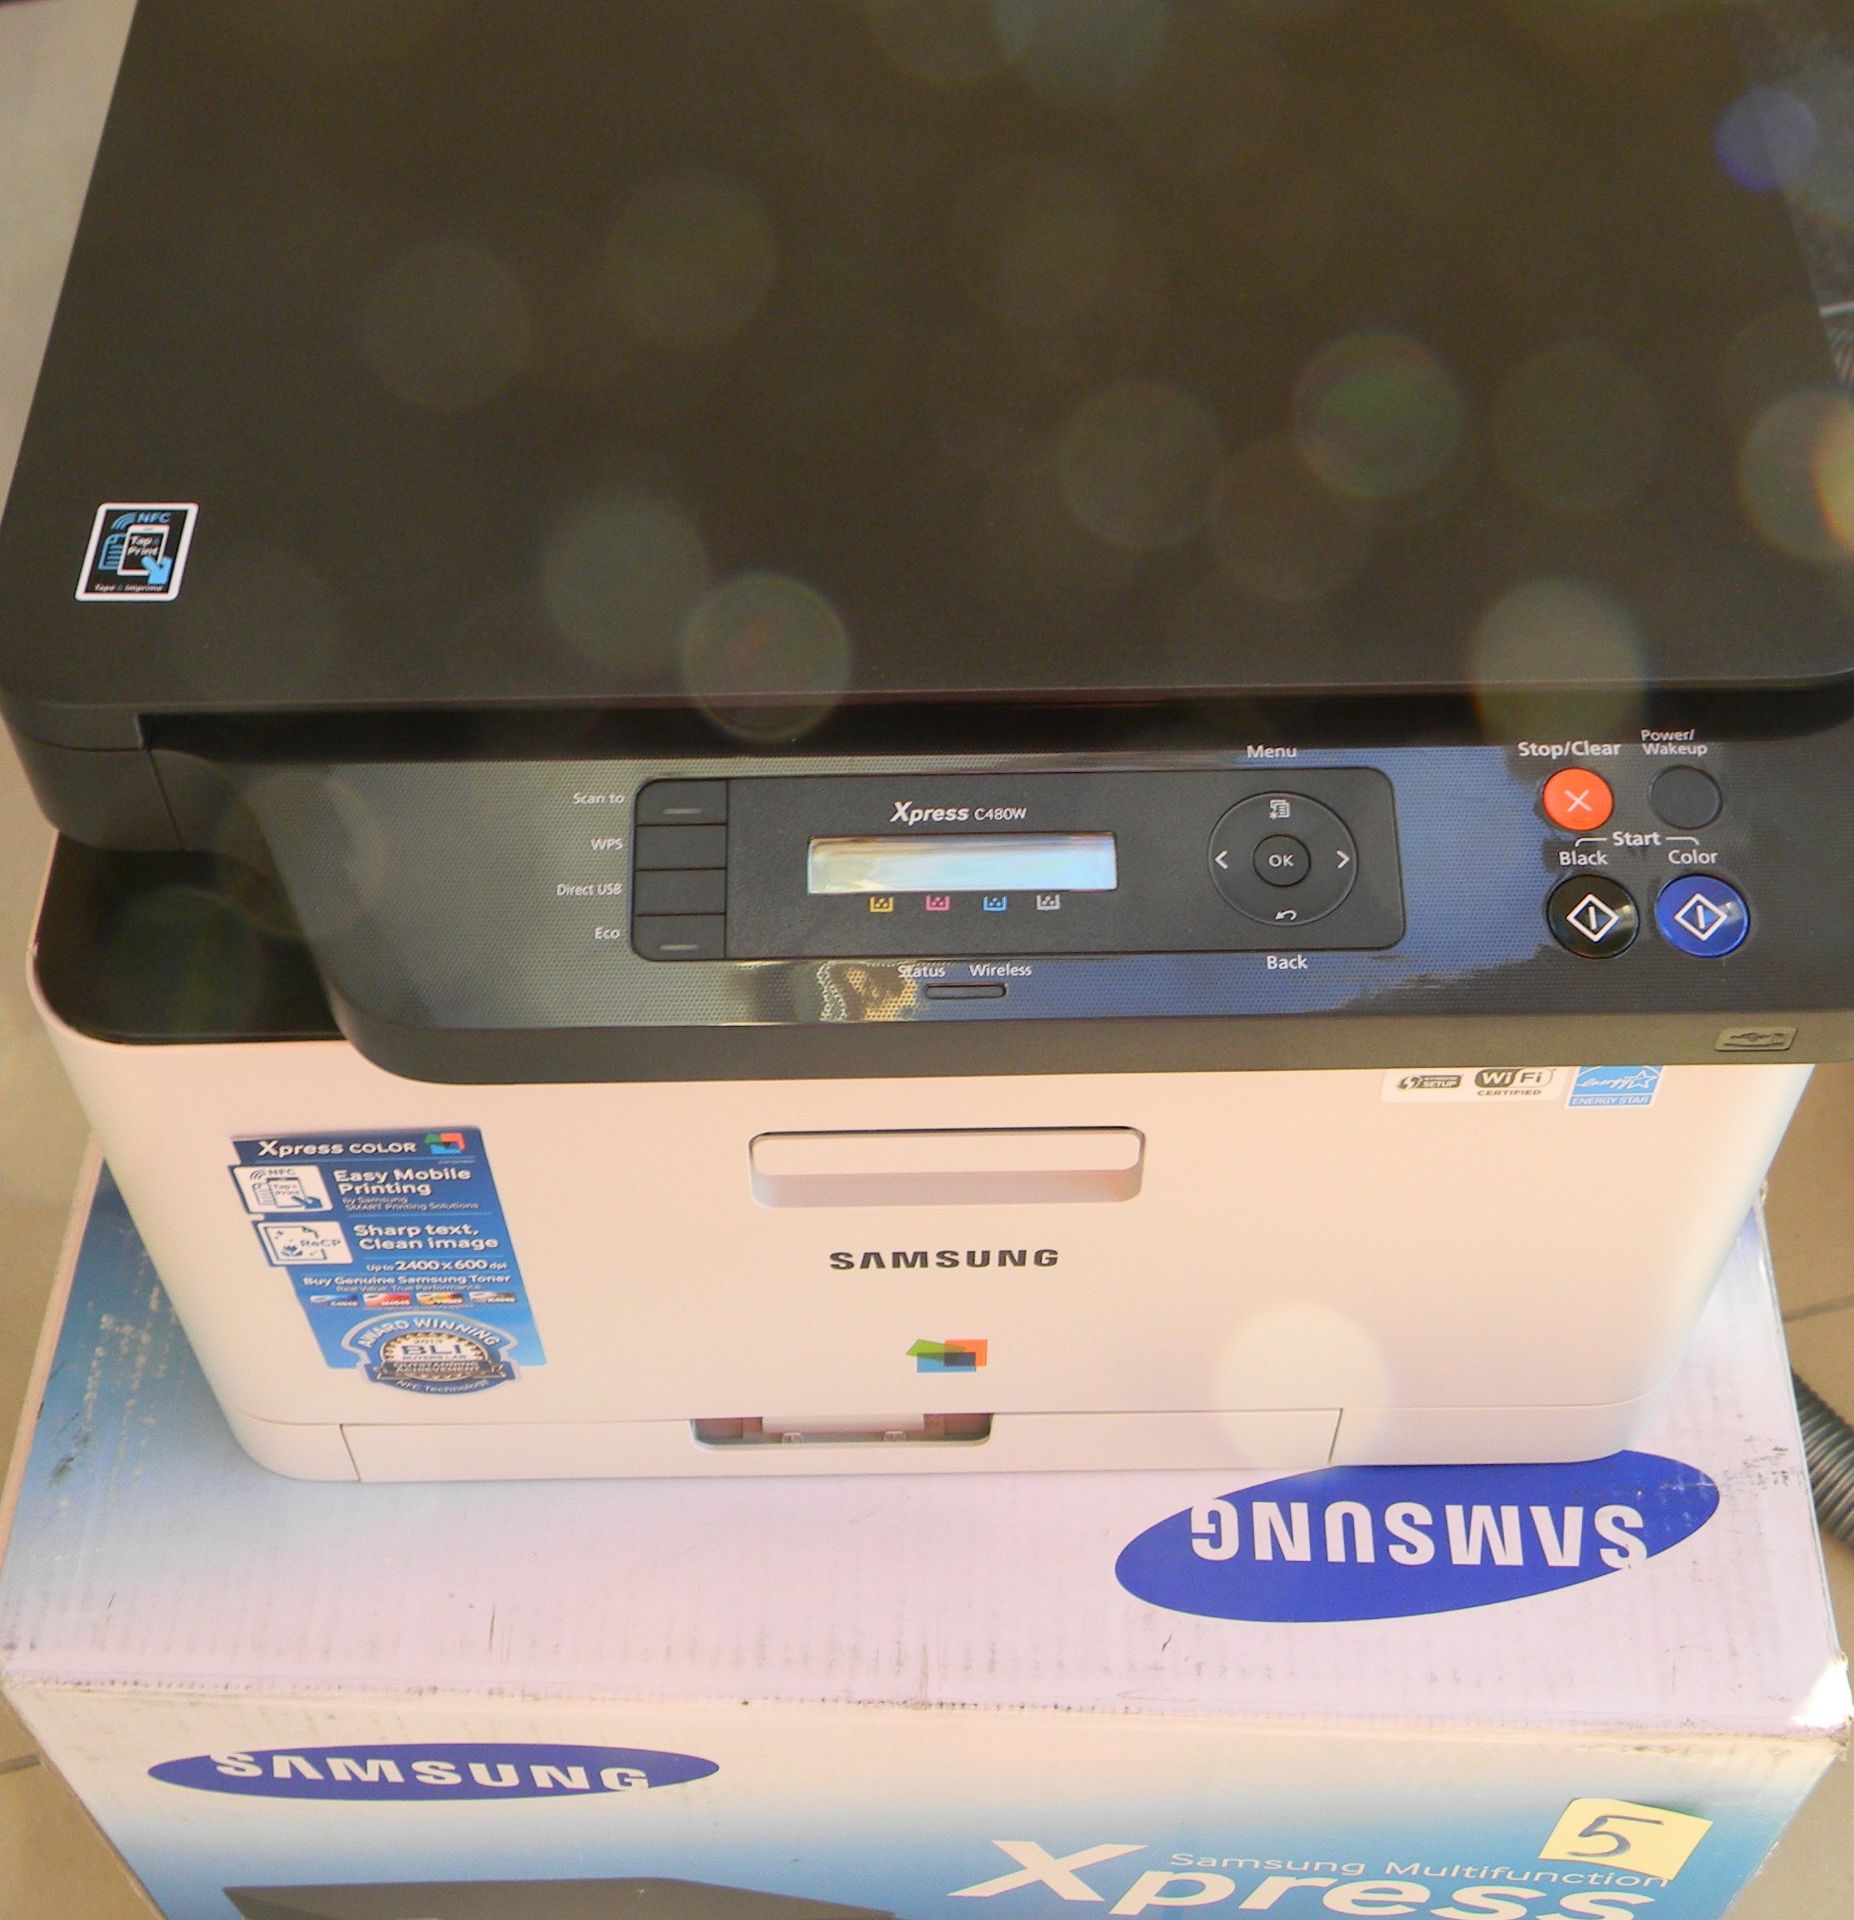 Samsung Xpress C480W Colour Laser Multifunctional Printer (Like New) - Image 2 of 6